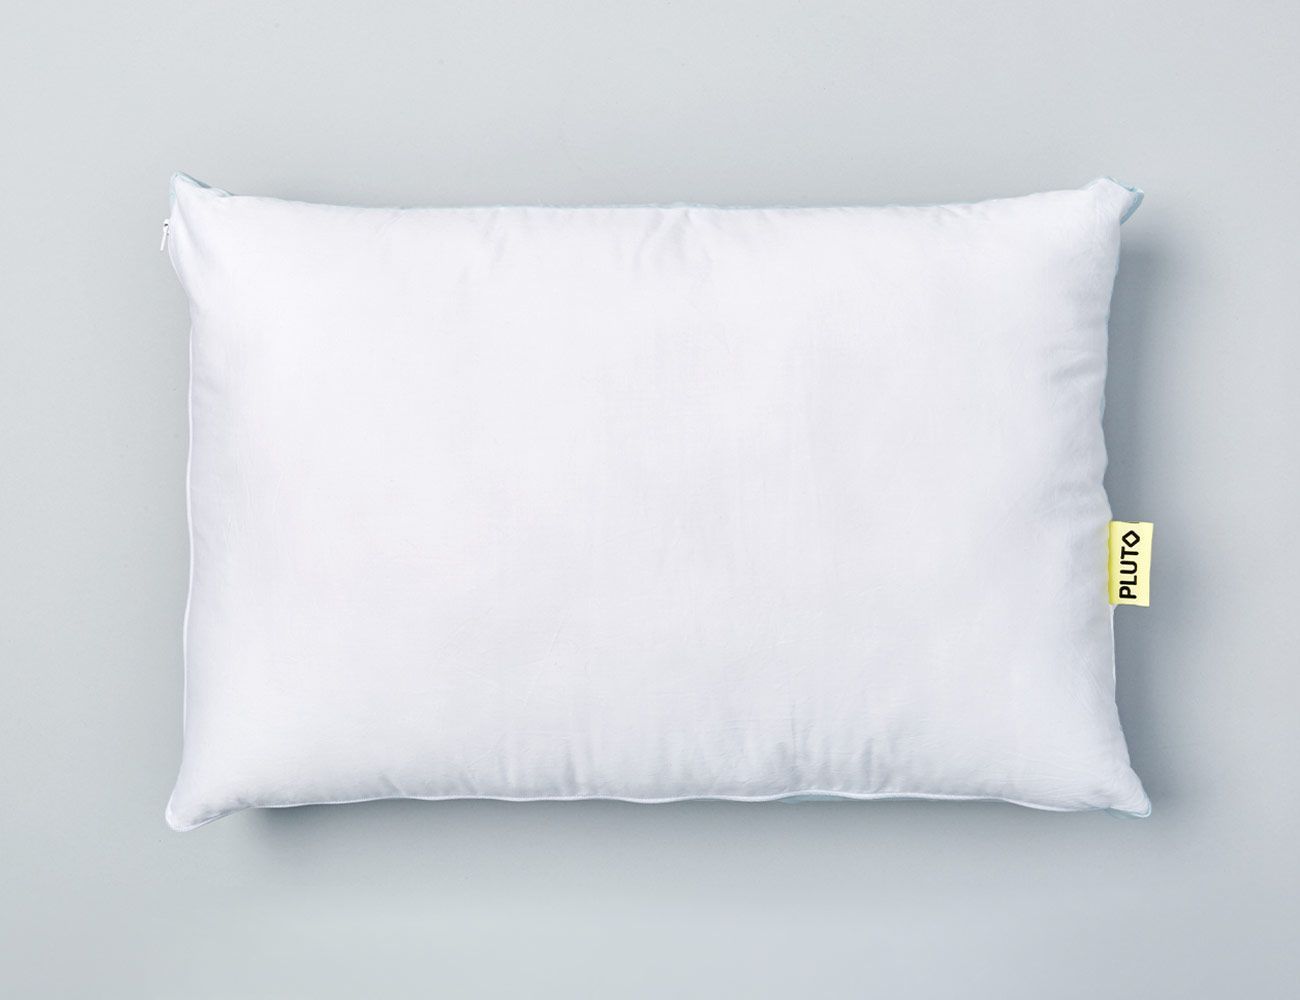 The 10 Best Pillows of 2022: Coop Home Goods, Purple & More